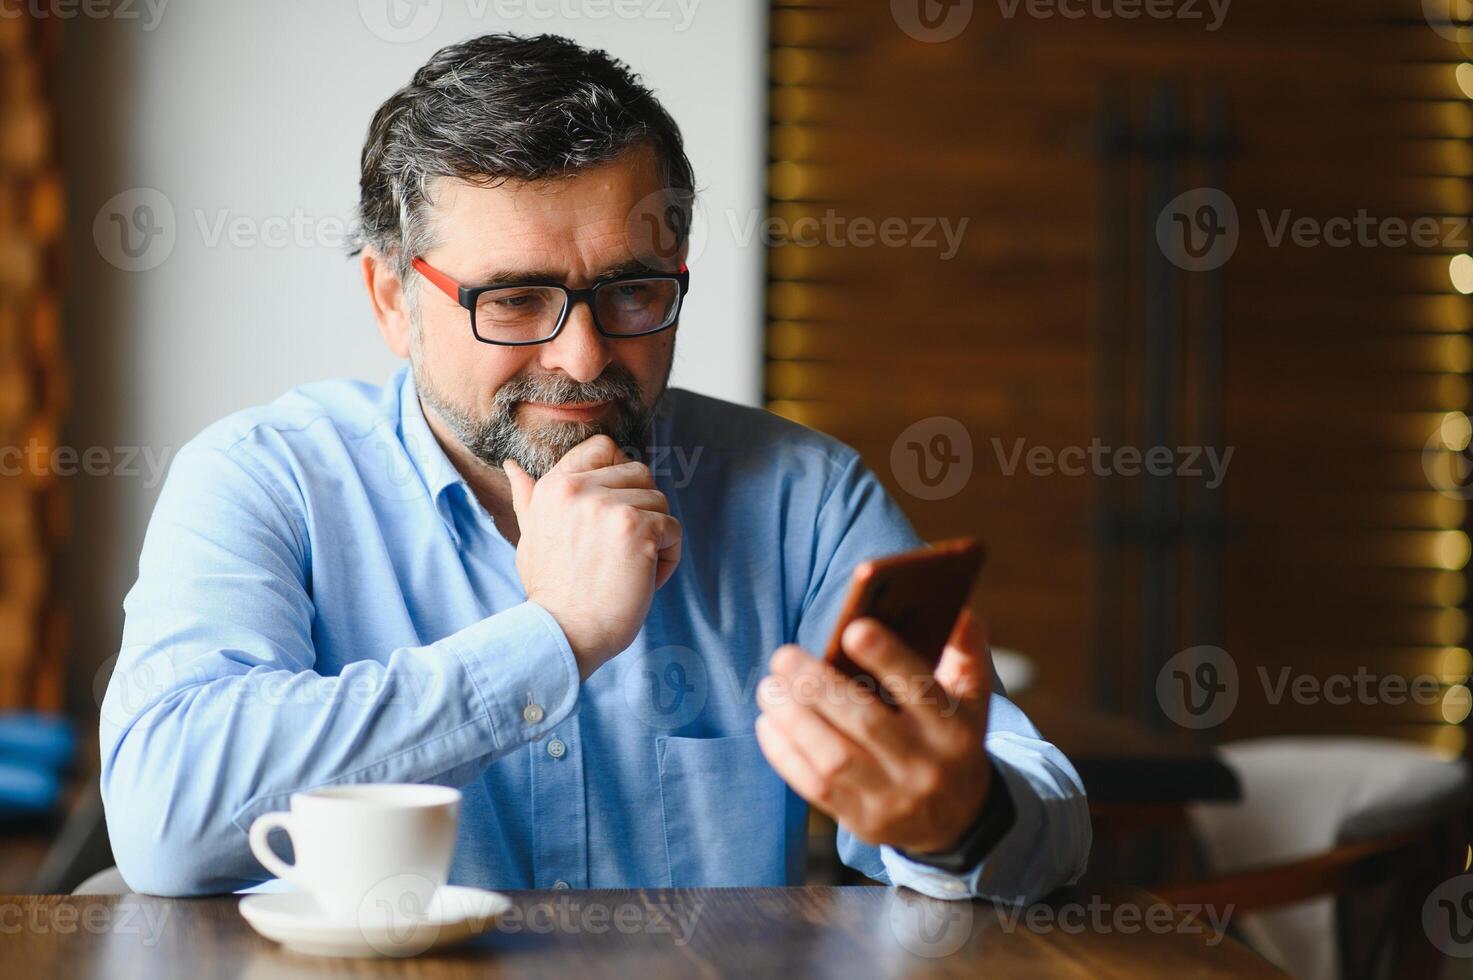 Happy businessman sitting in restaurant and waiting for lunch. He is using smart phone and talking with someone. Business seniors lifestyle concept. photo